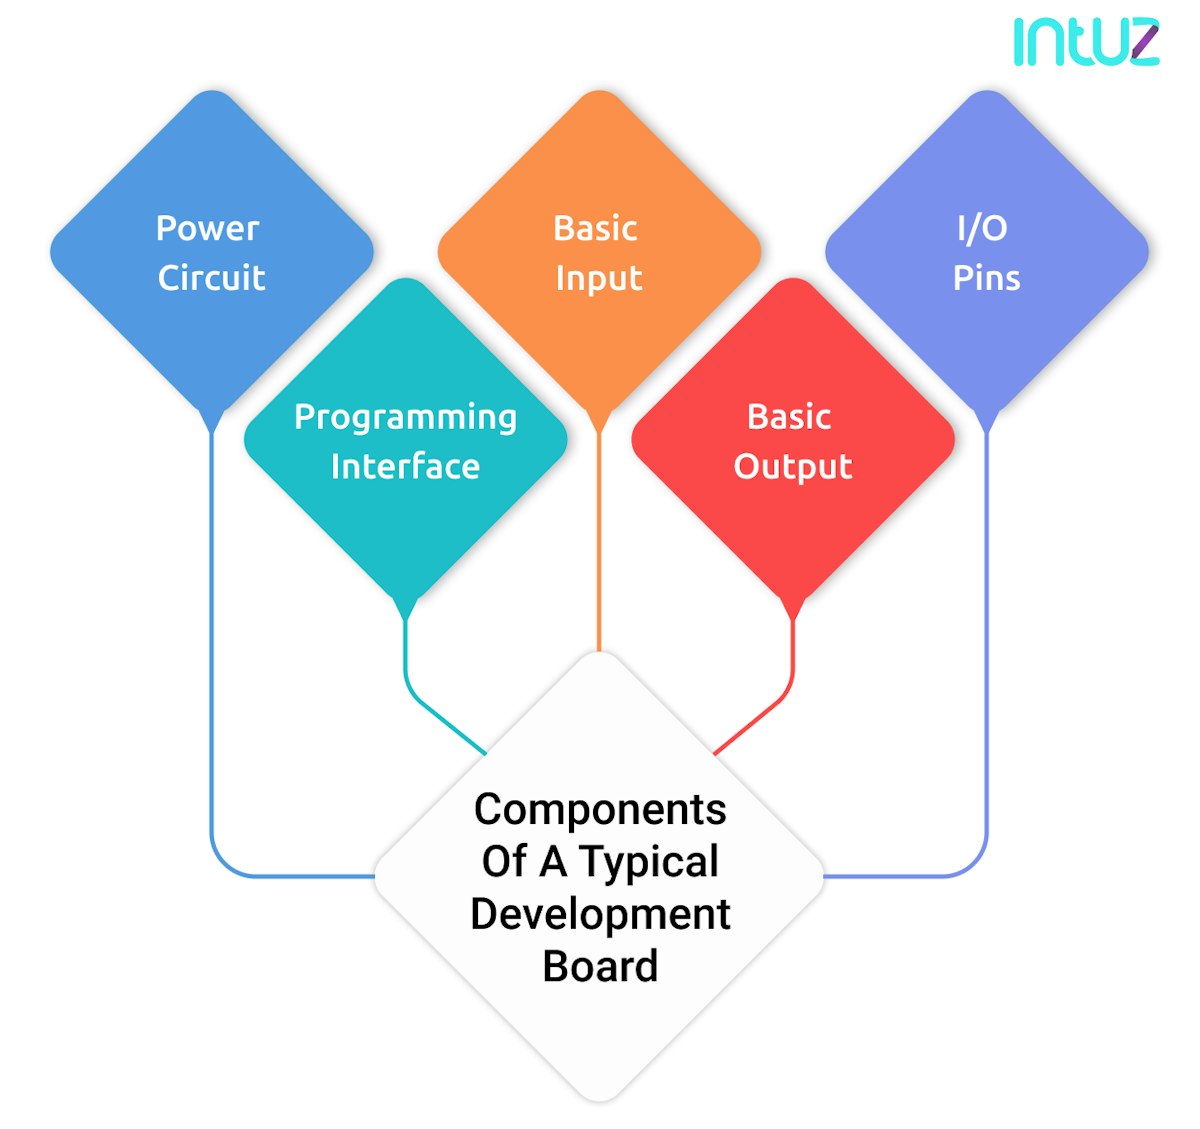 Components of a Typical Development Board